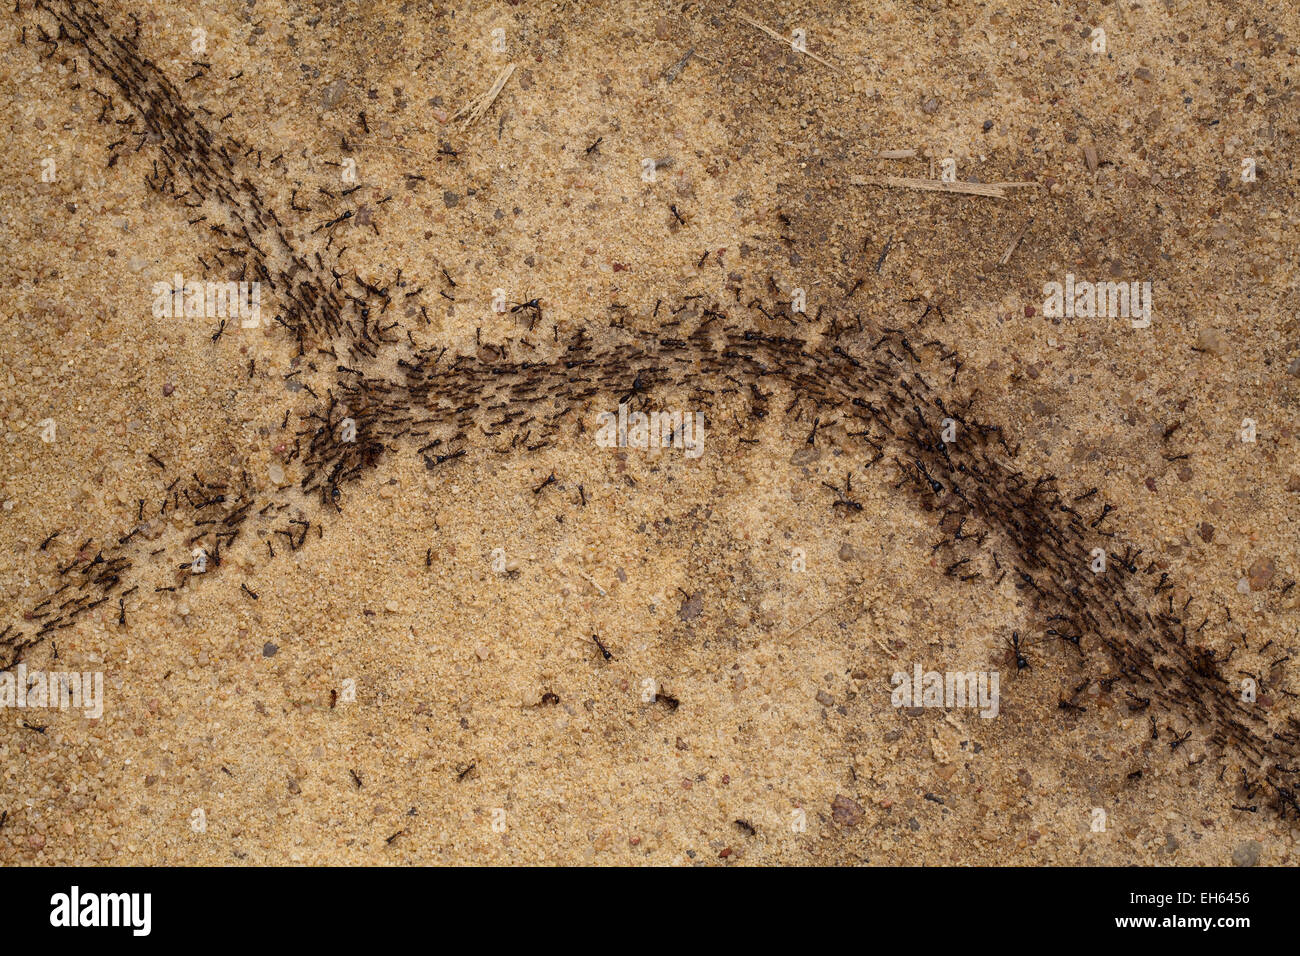 Driver, Army or Safari Ants (Dorylus sp. ). Workers and bigger soldier classes on the move. Ghana. West Africa. Stock Photo